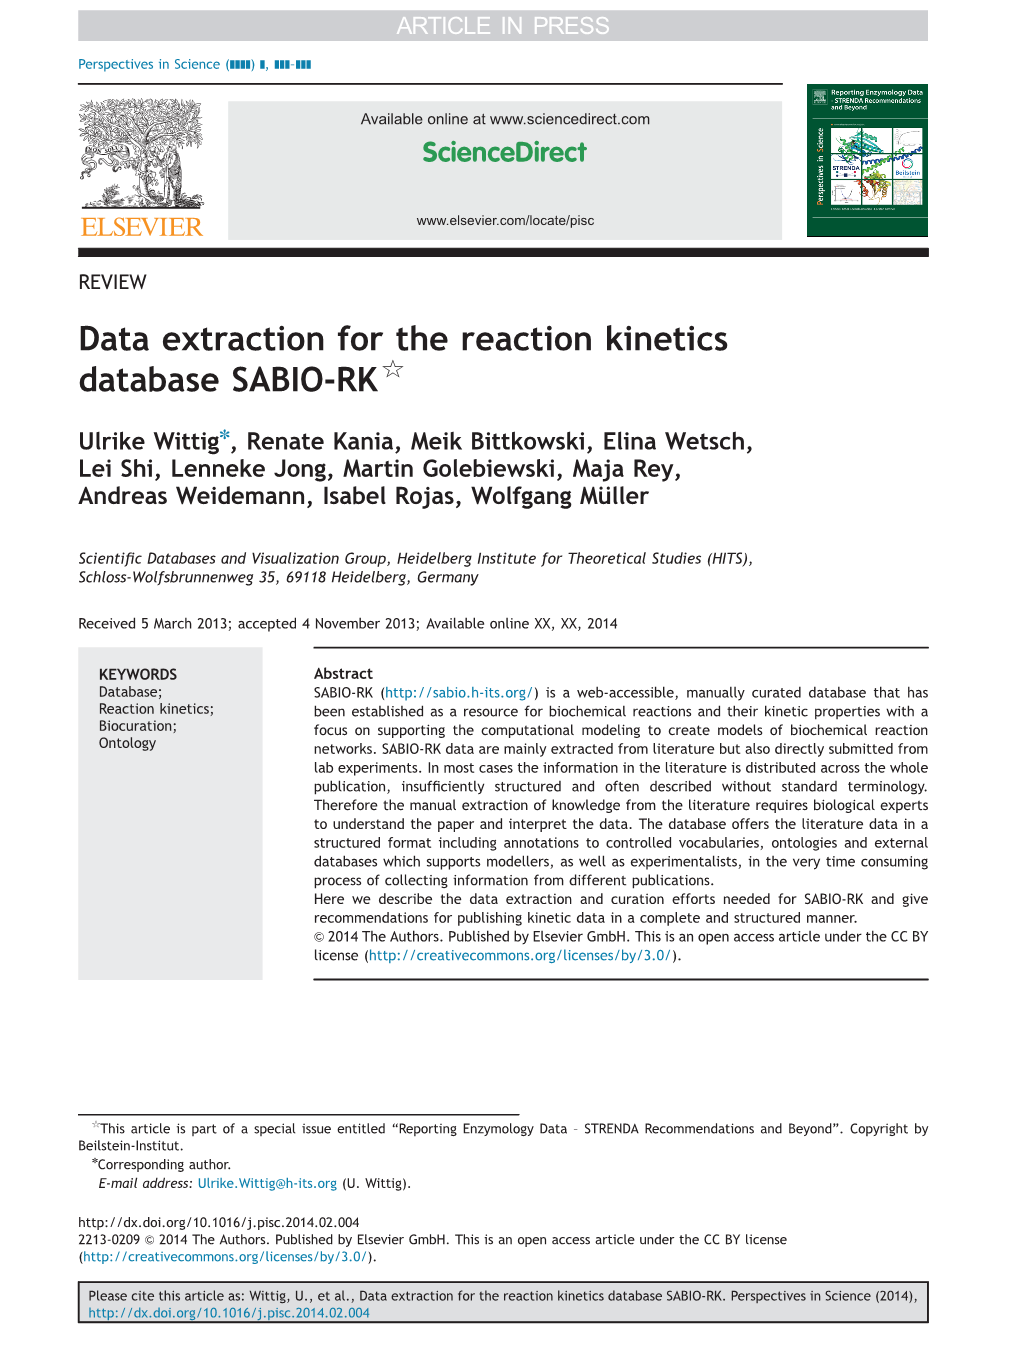 Data Extraction for the Reaction Kinetics Database SABIO-RK$